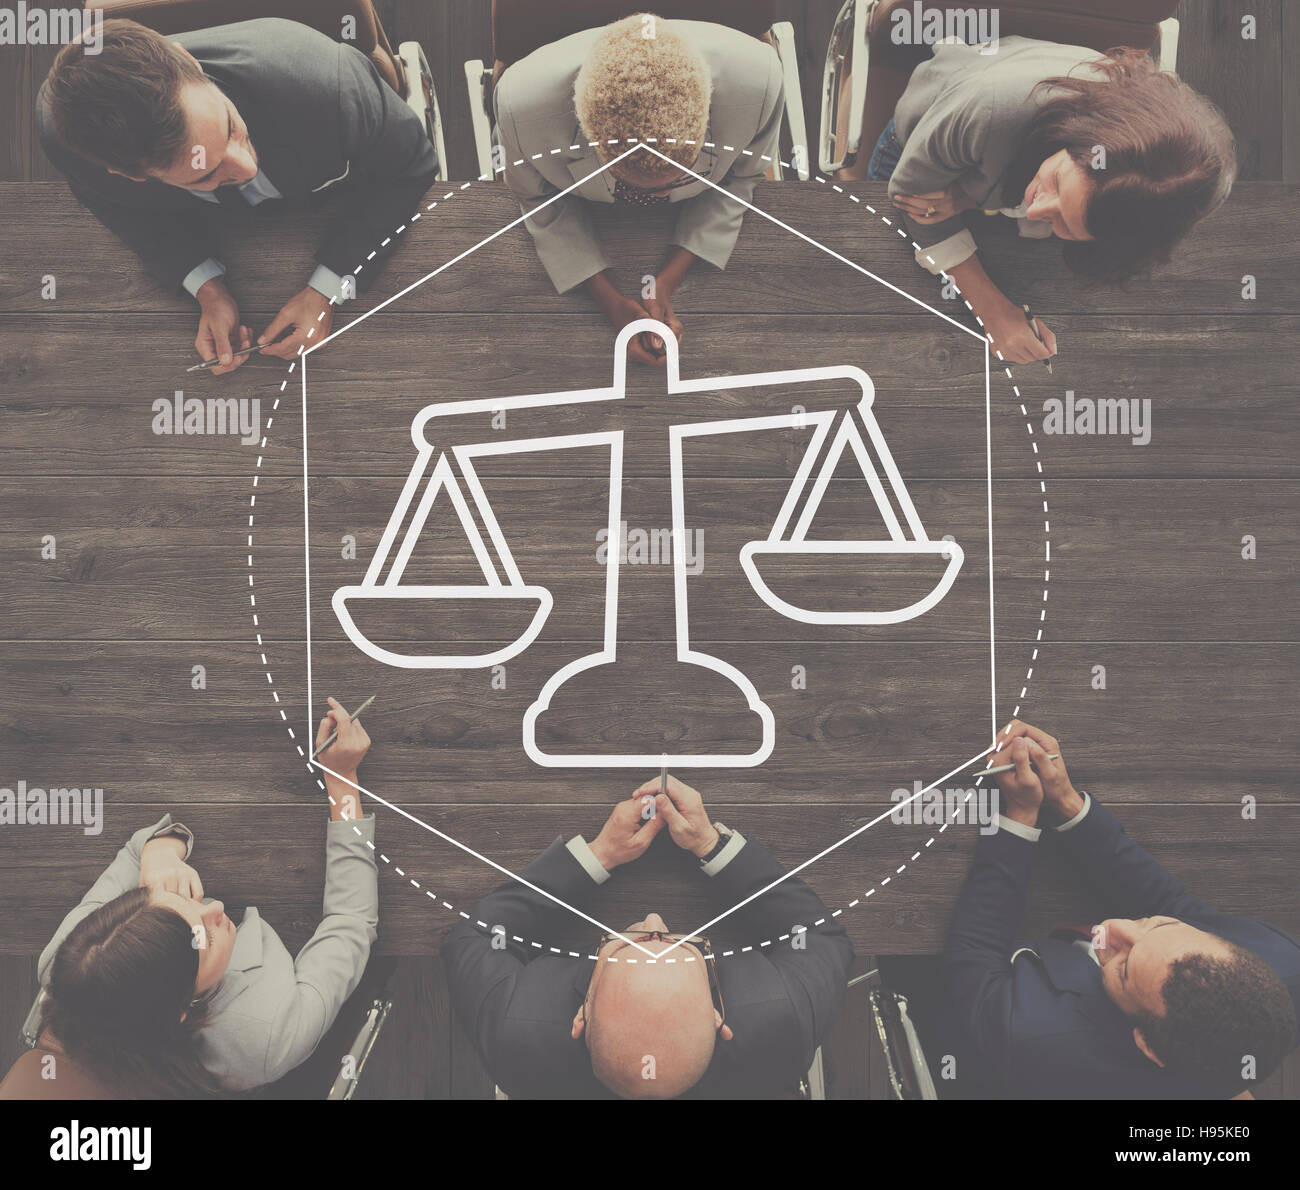 Justice Law Order Legal Graphic Concept Stock Photo